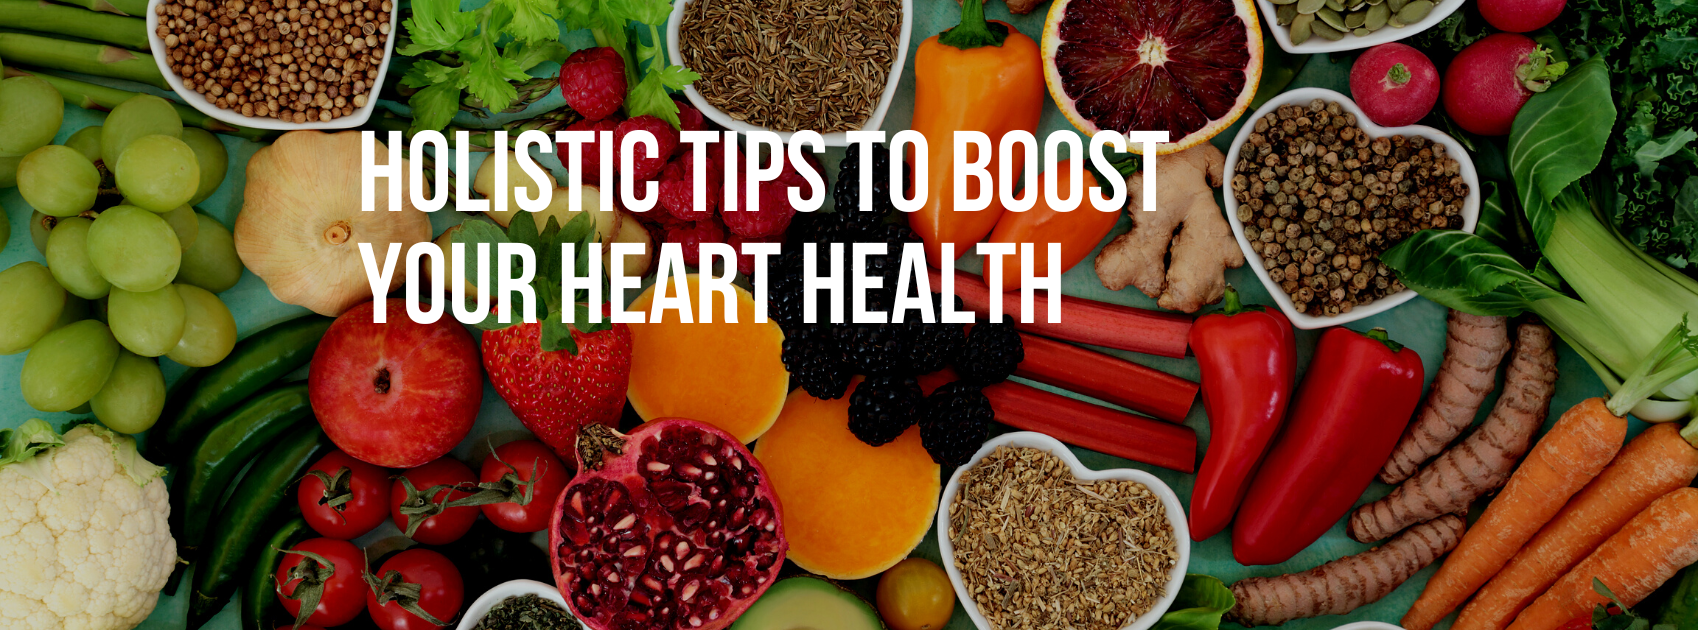 Holistic Tips to Boost Your Heart Health